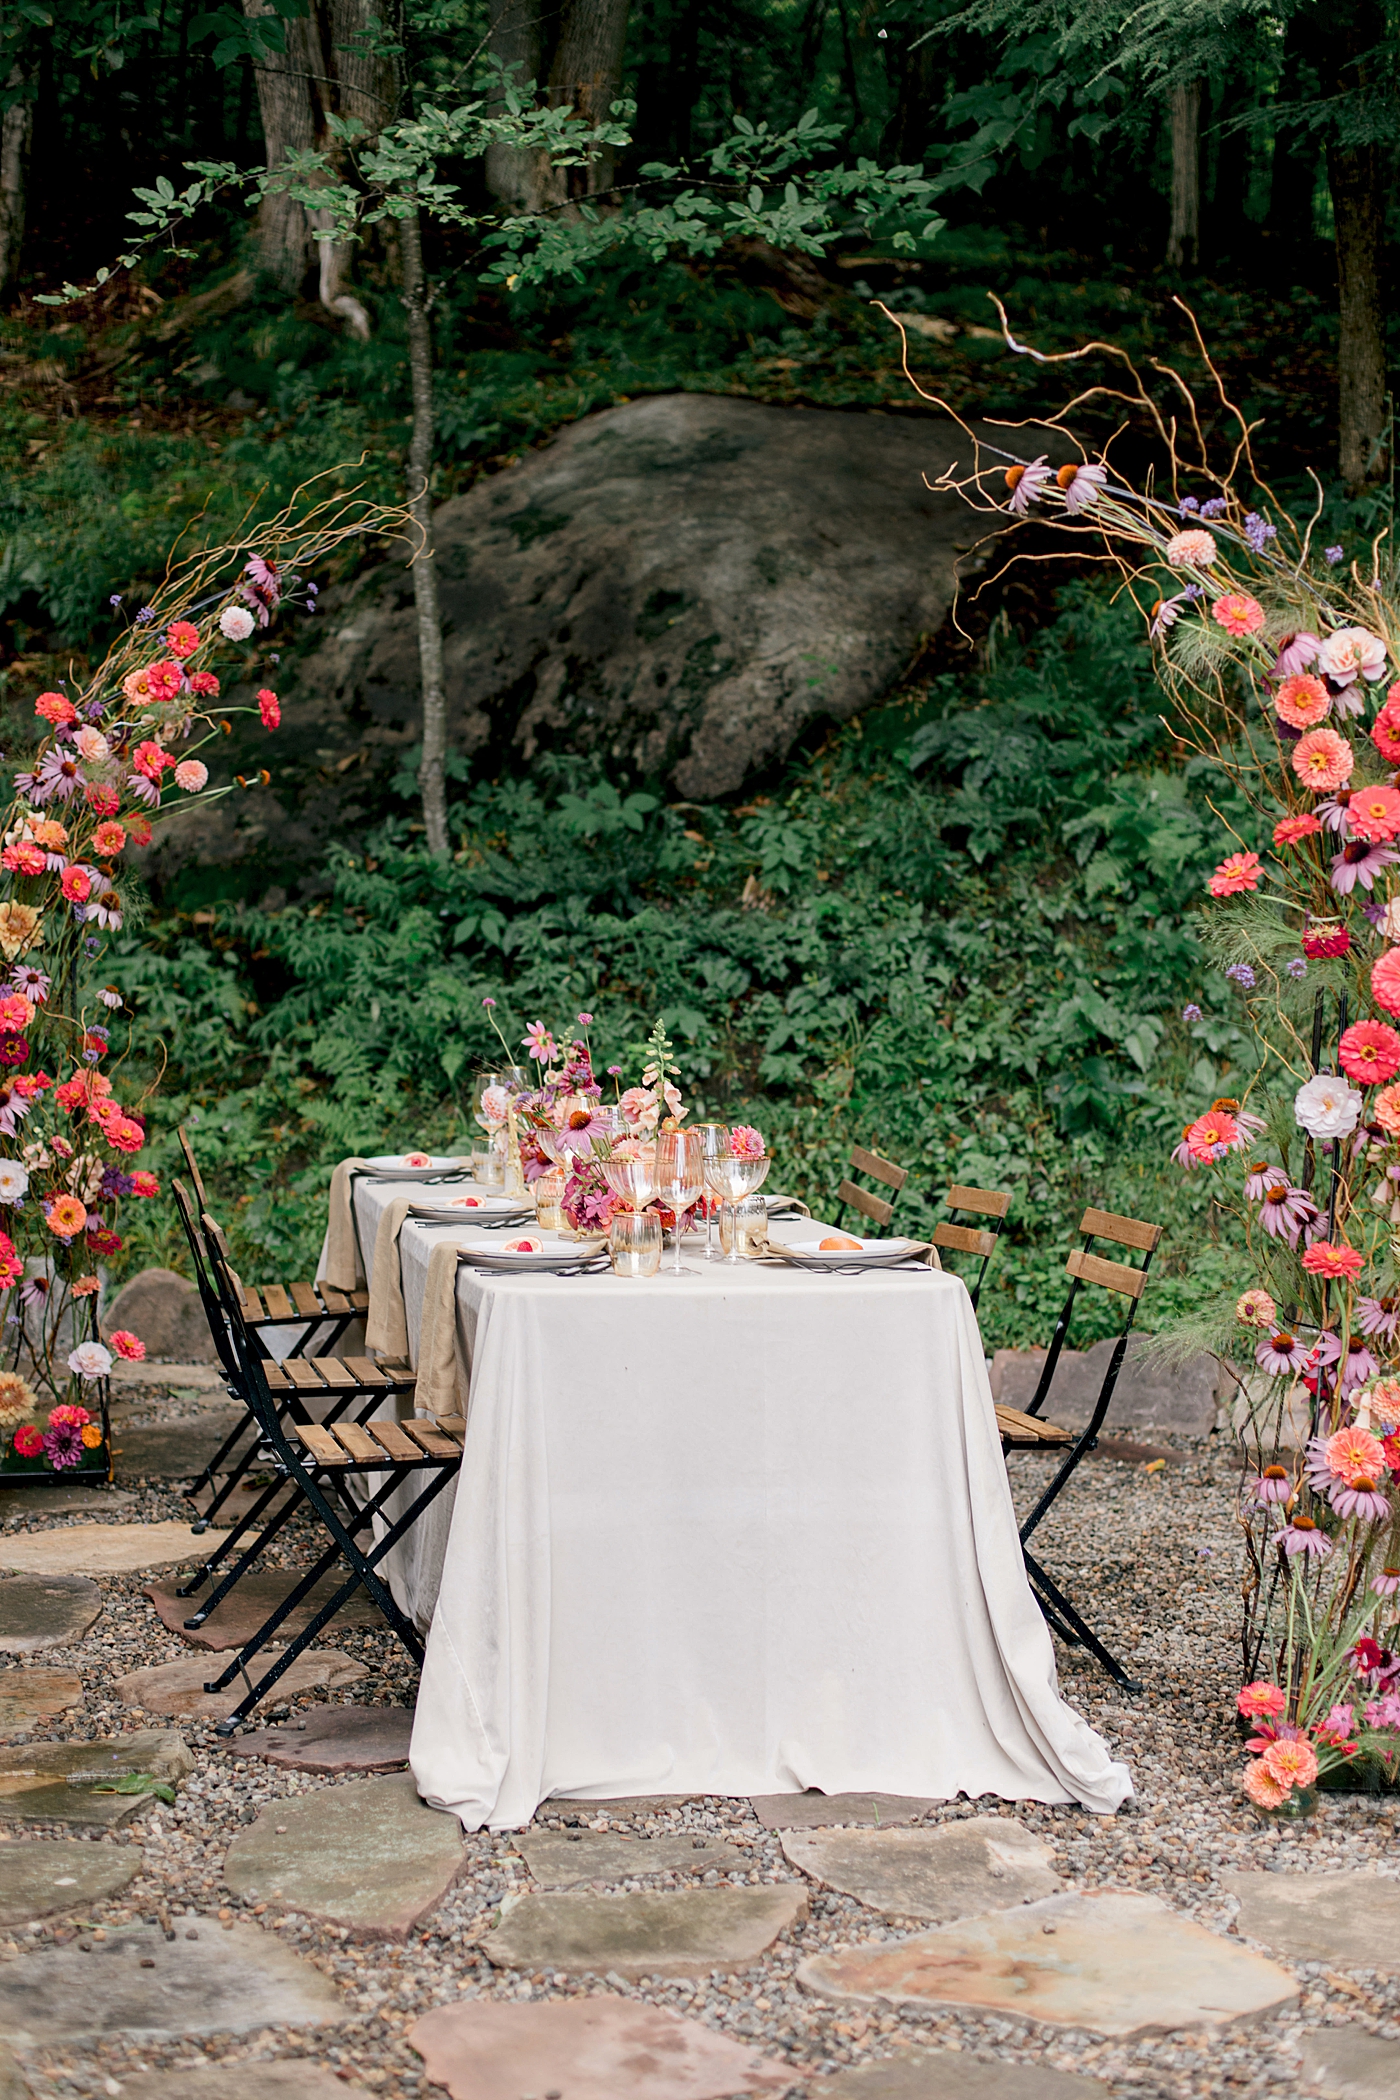 Reception table with colorful flower arbor during Adirondack Mountain Elopement Weekend | Image by Hope Helmuth Photography